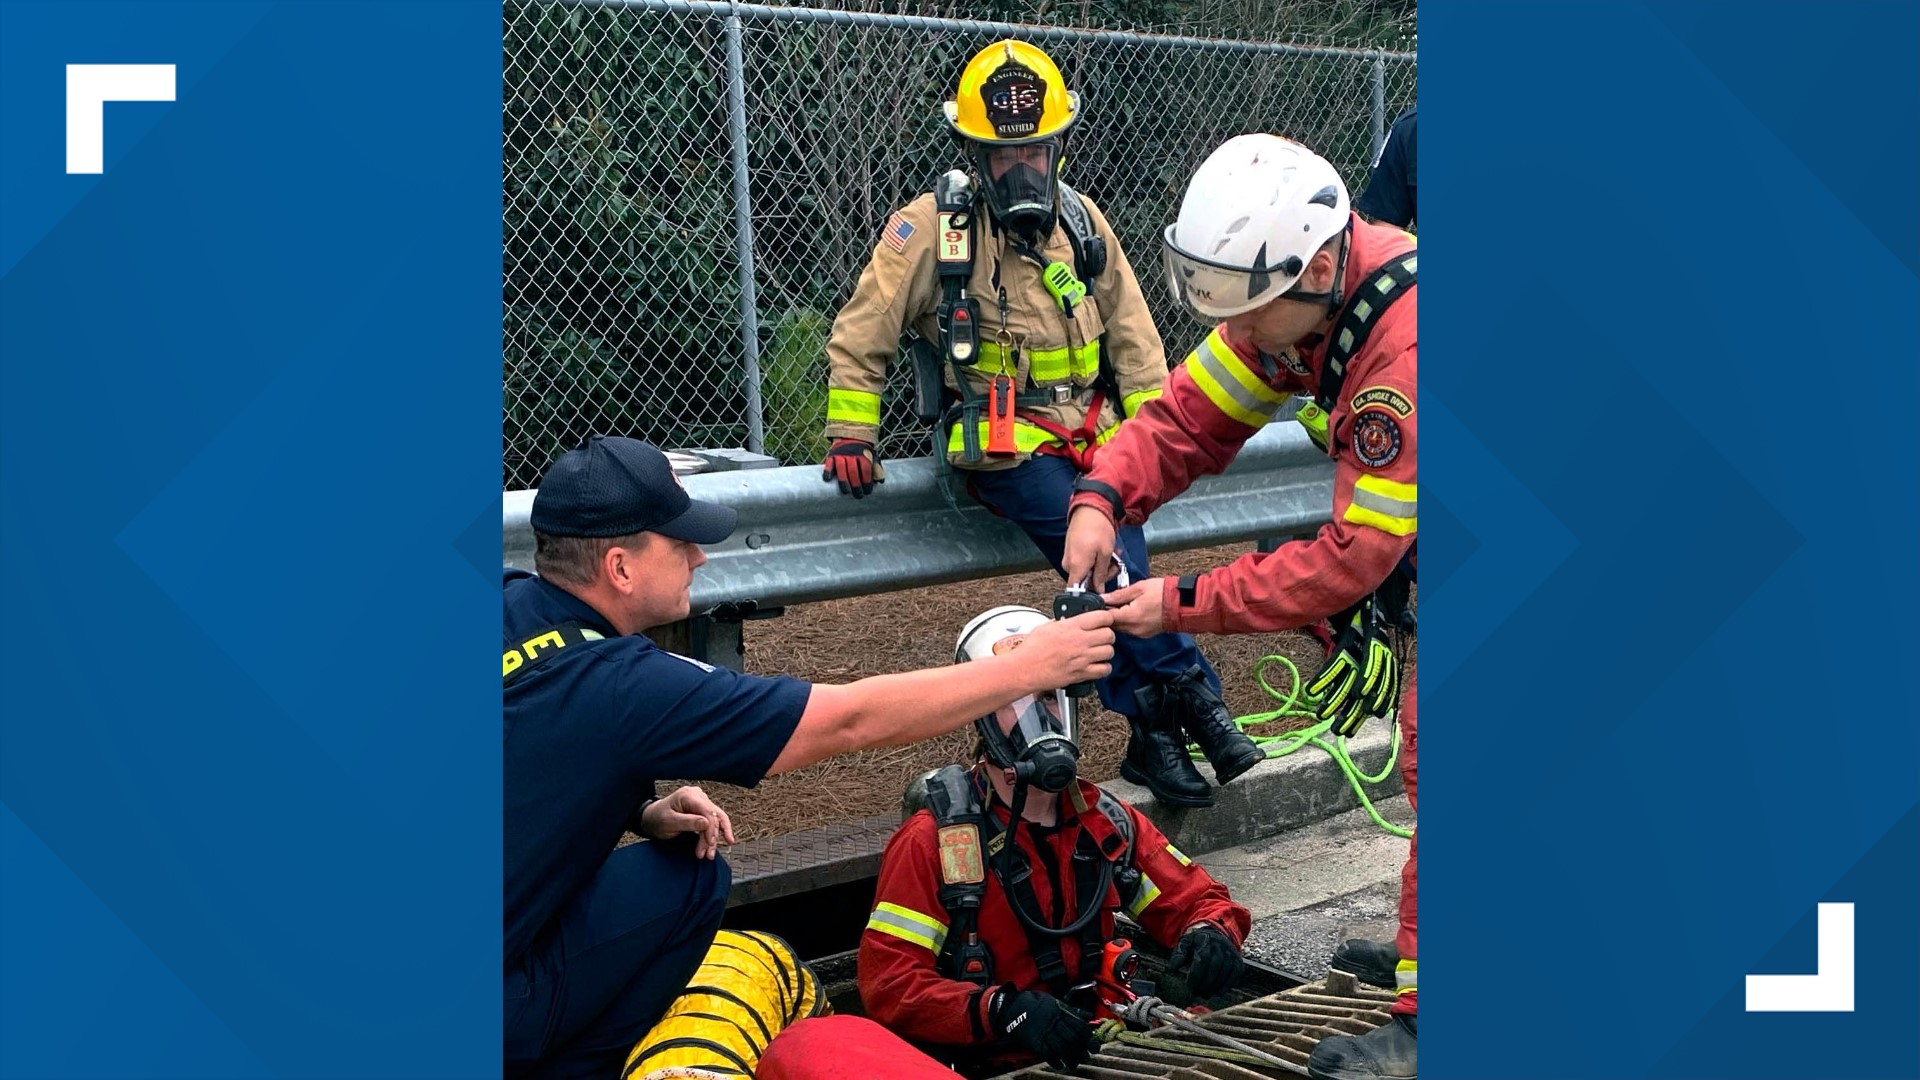 Firefighters rescue dog from storm drain in Cobb Co | 11alive.com